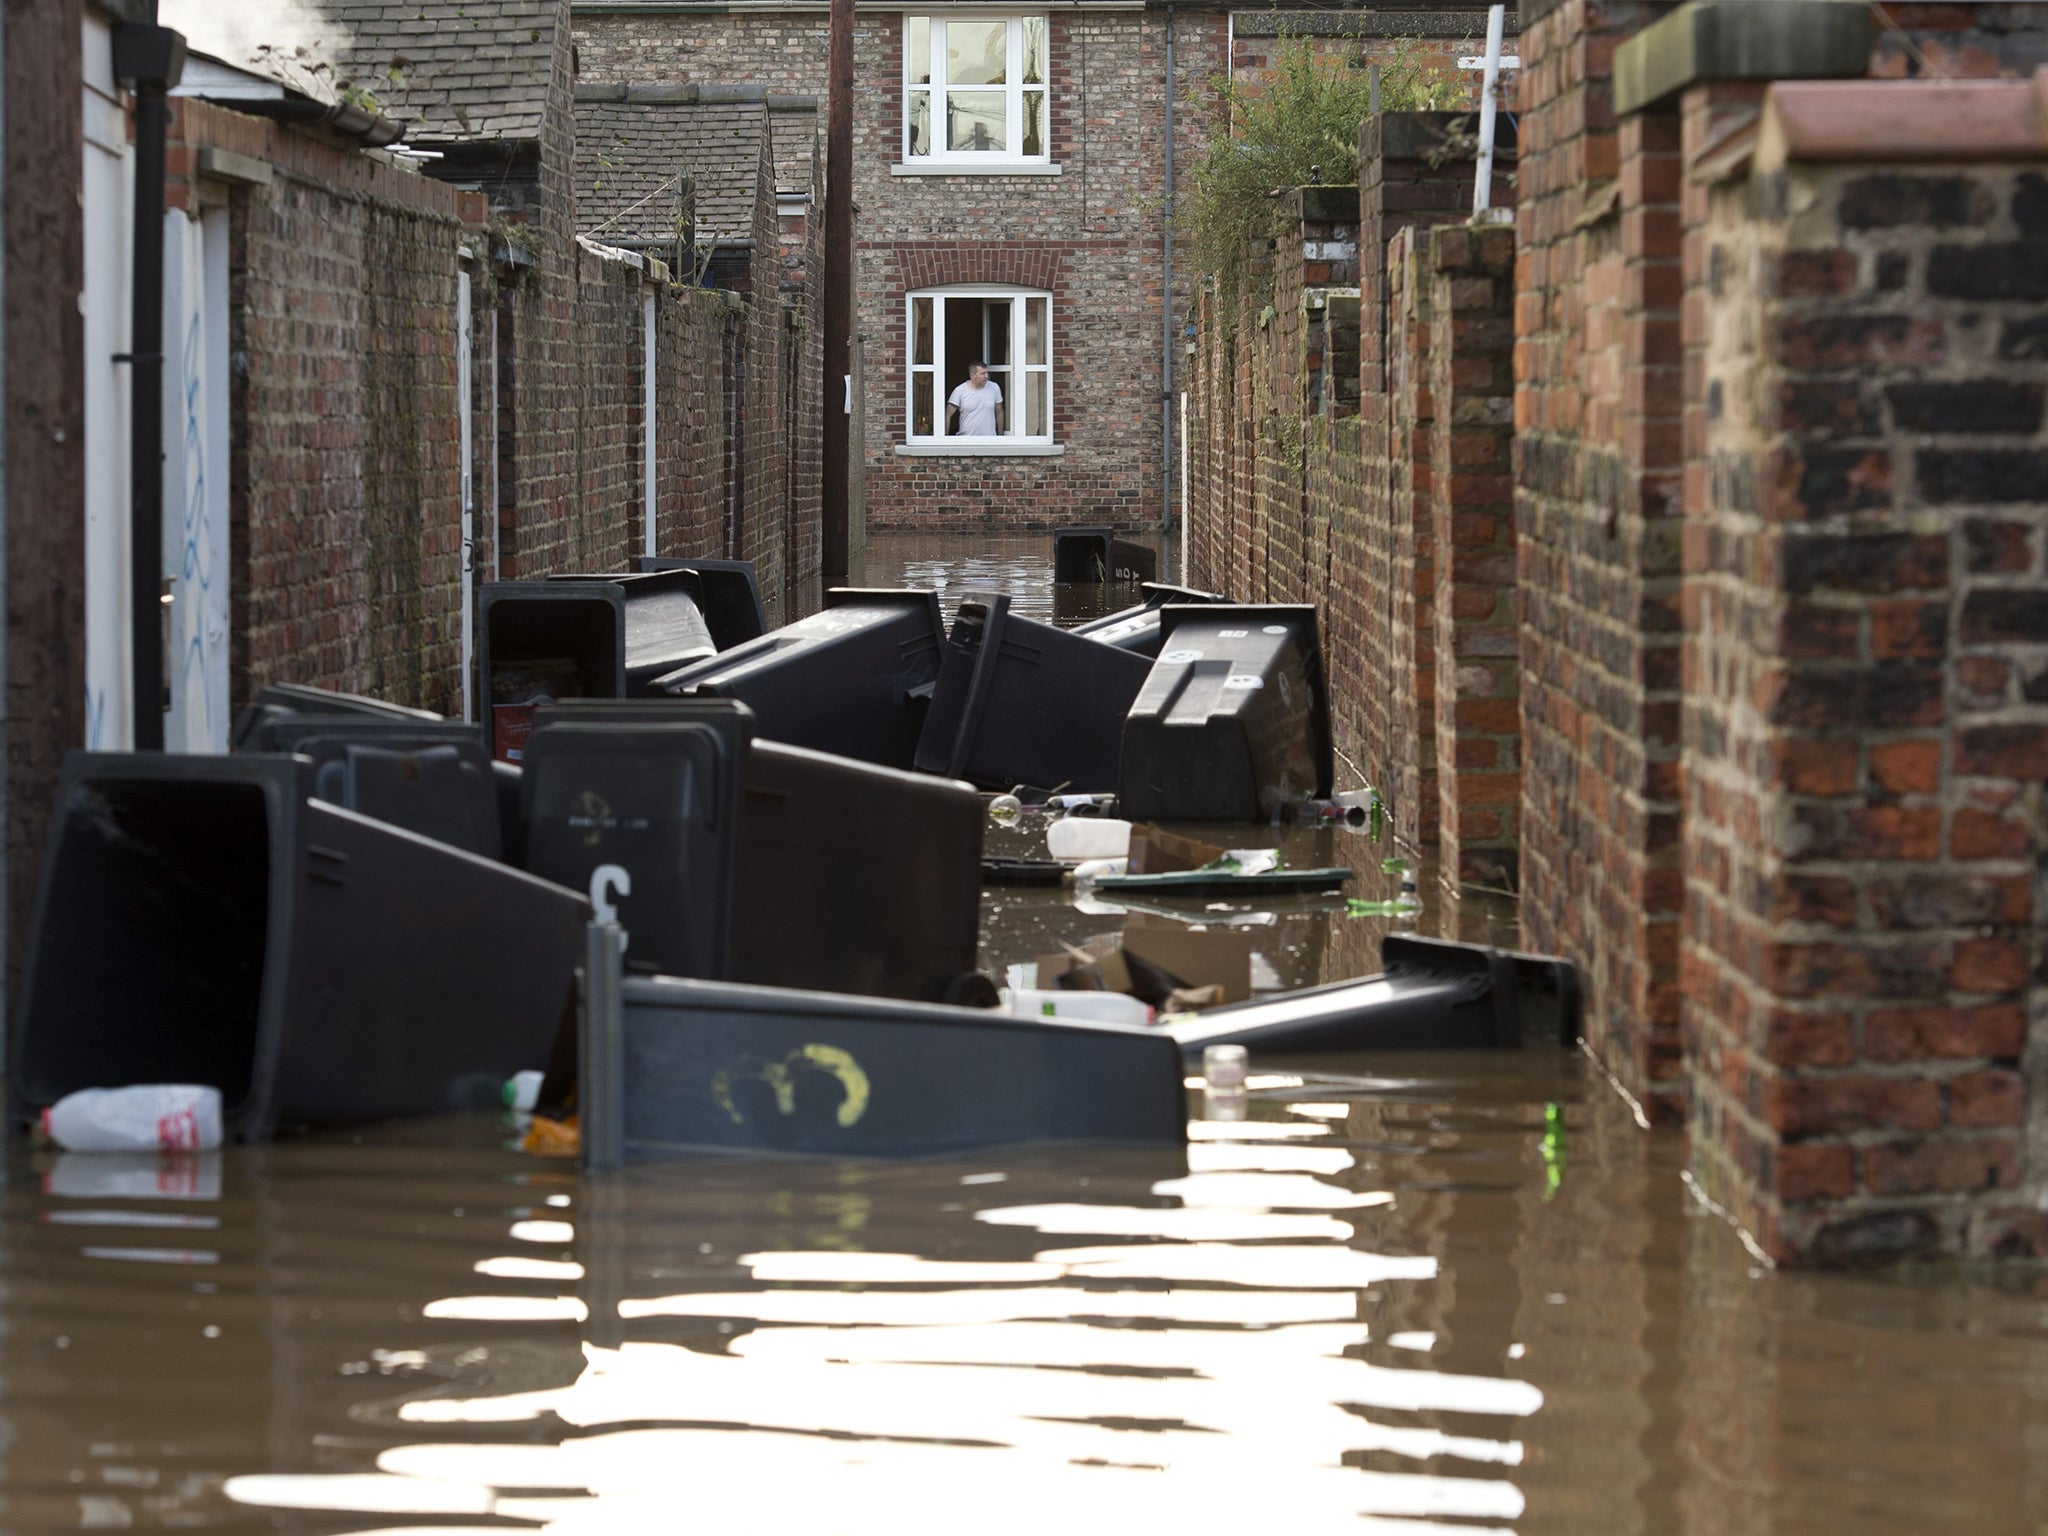 A man looks out onto an alleyway filled with floating garbage bins after the adjacent River Ouse burst it's banks in York, northern England,